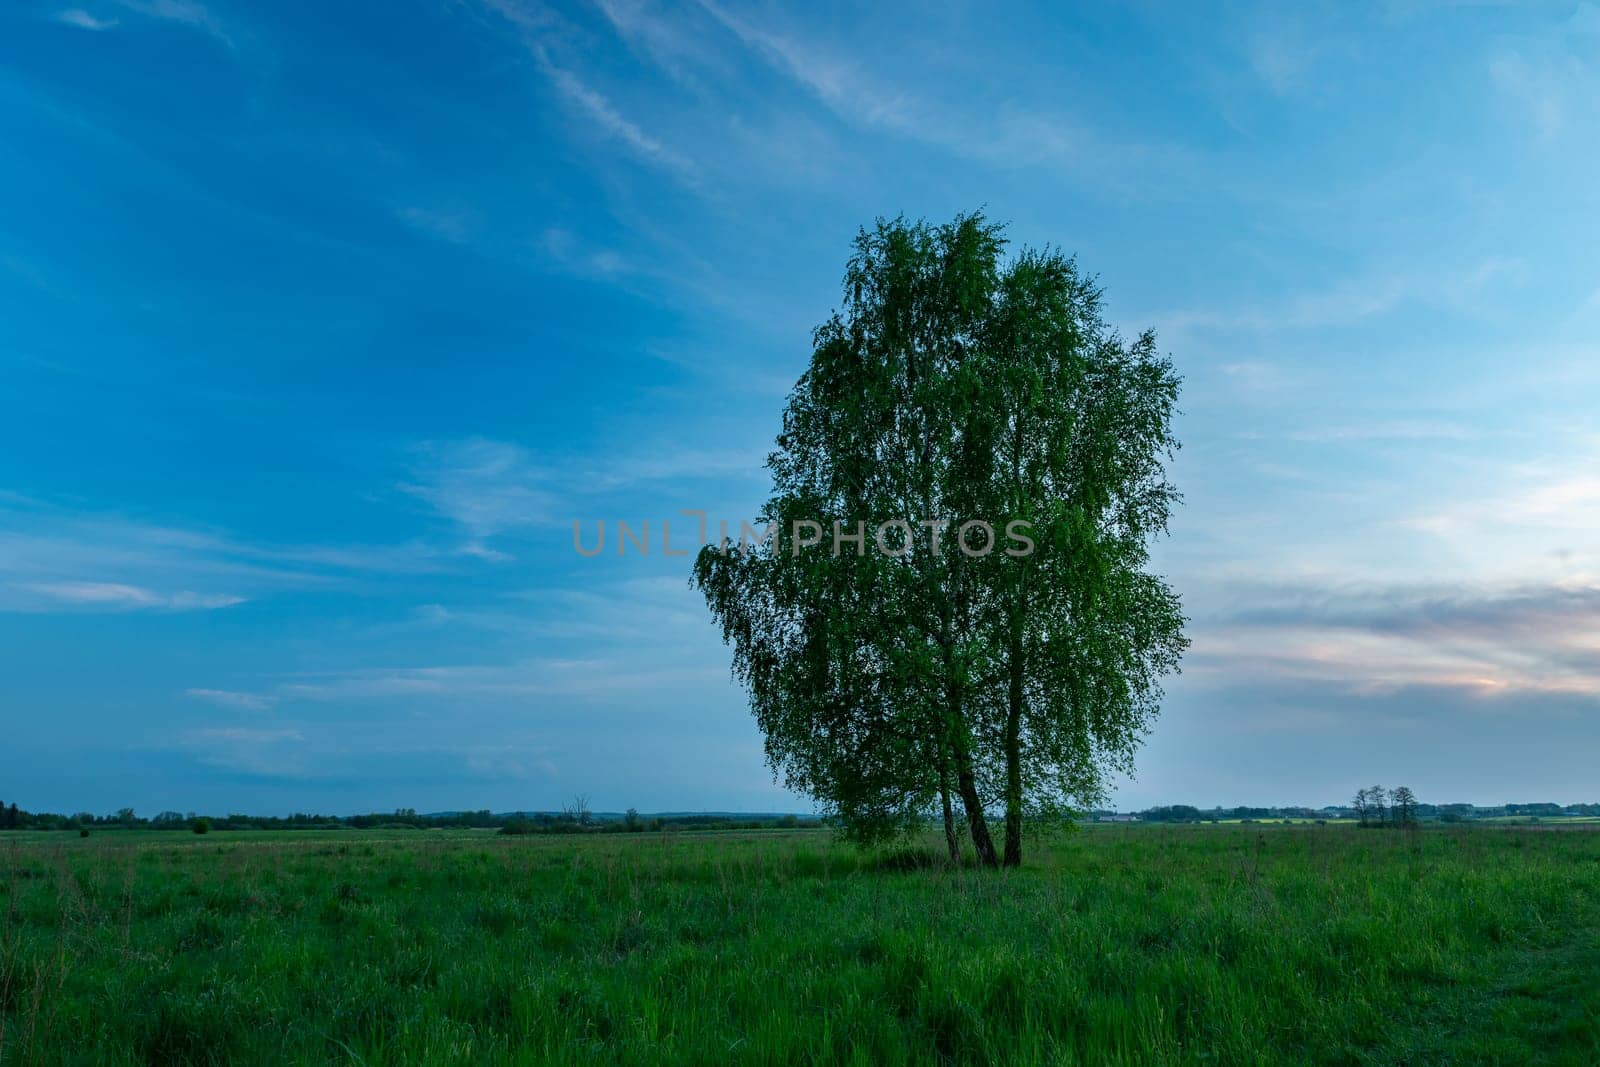 Tall tree in the meadow and the evening sky, eastern Poland